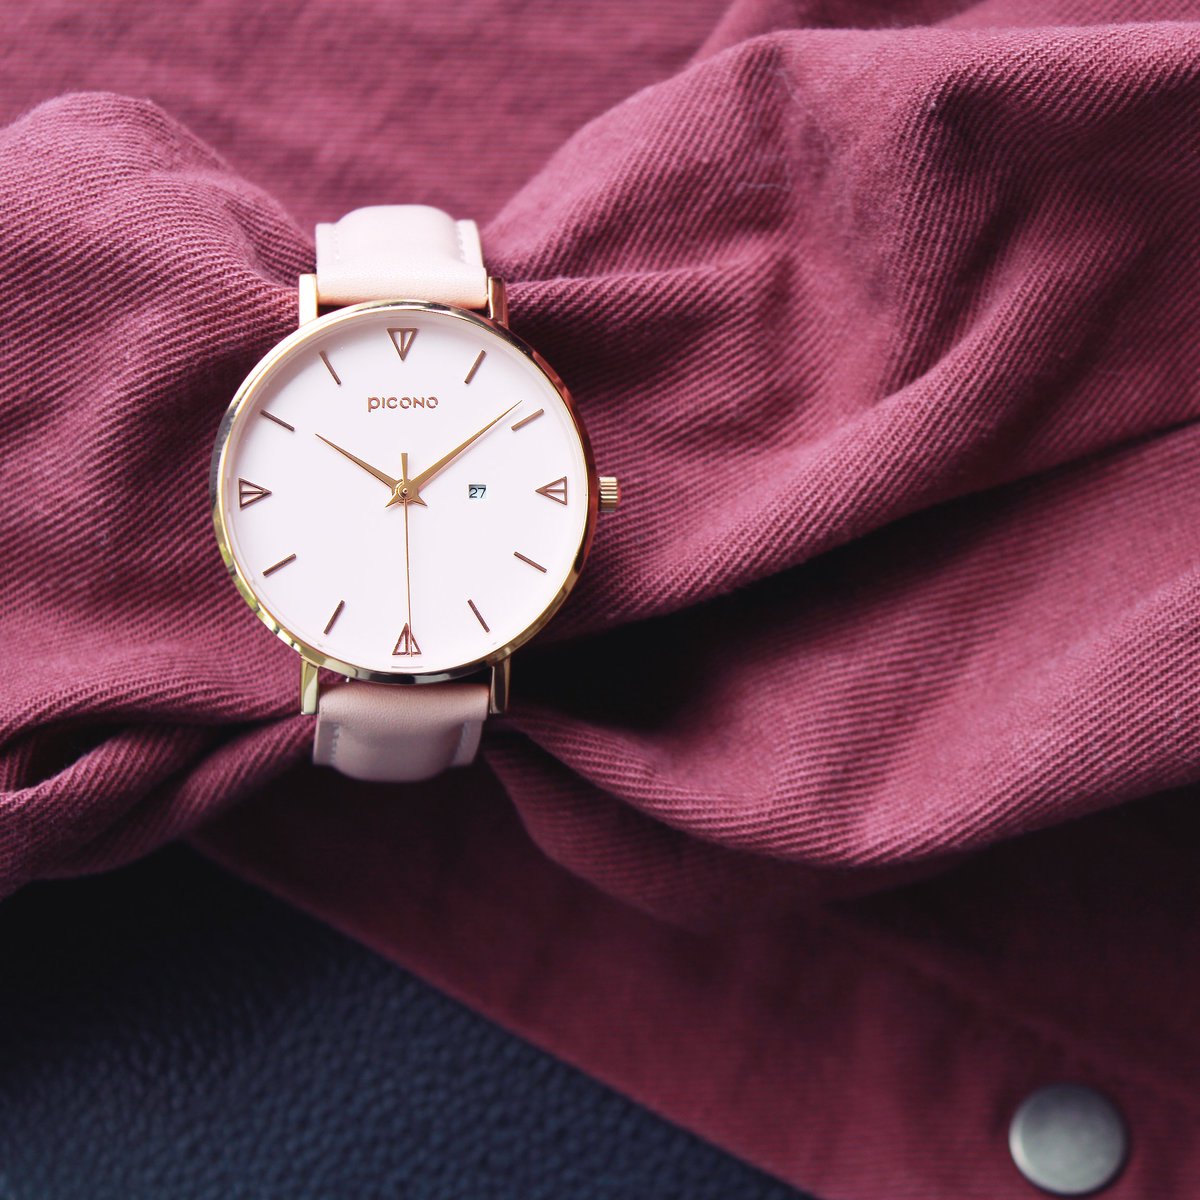 Every outfit with pink will become cute and fashion.
Photo : Amour BU-8601
buff.ly/2G9AtPH
---------------------------
#PICONO #PICONOstyle #watch #pinkwatch #pink #wristwatch #ootd #ladiesoutfit #unique #swag #time #gift #love #wristshot